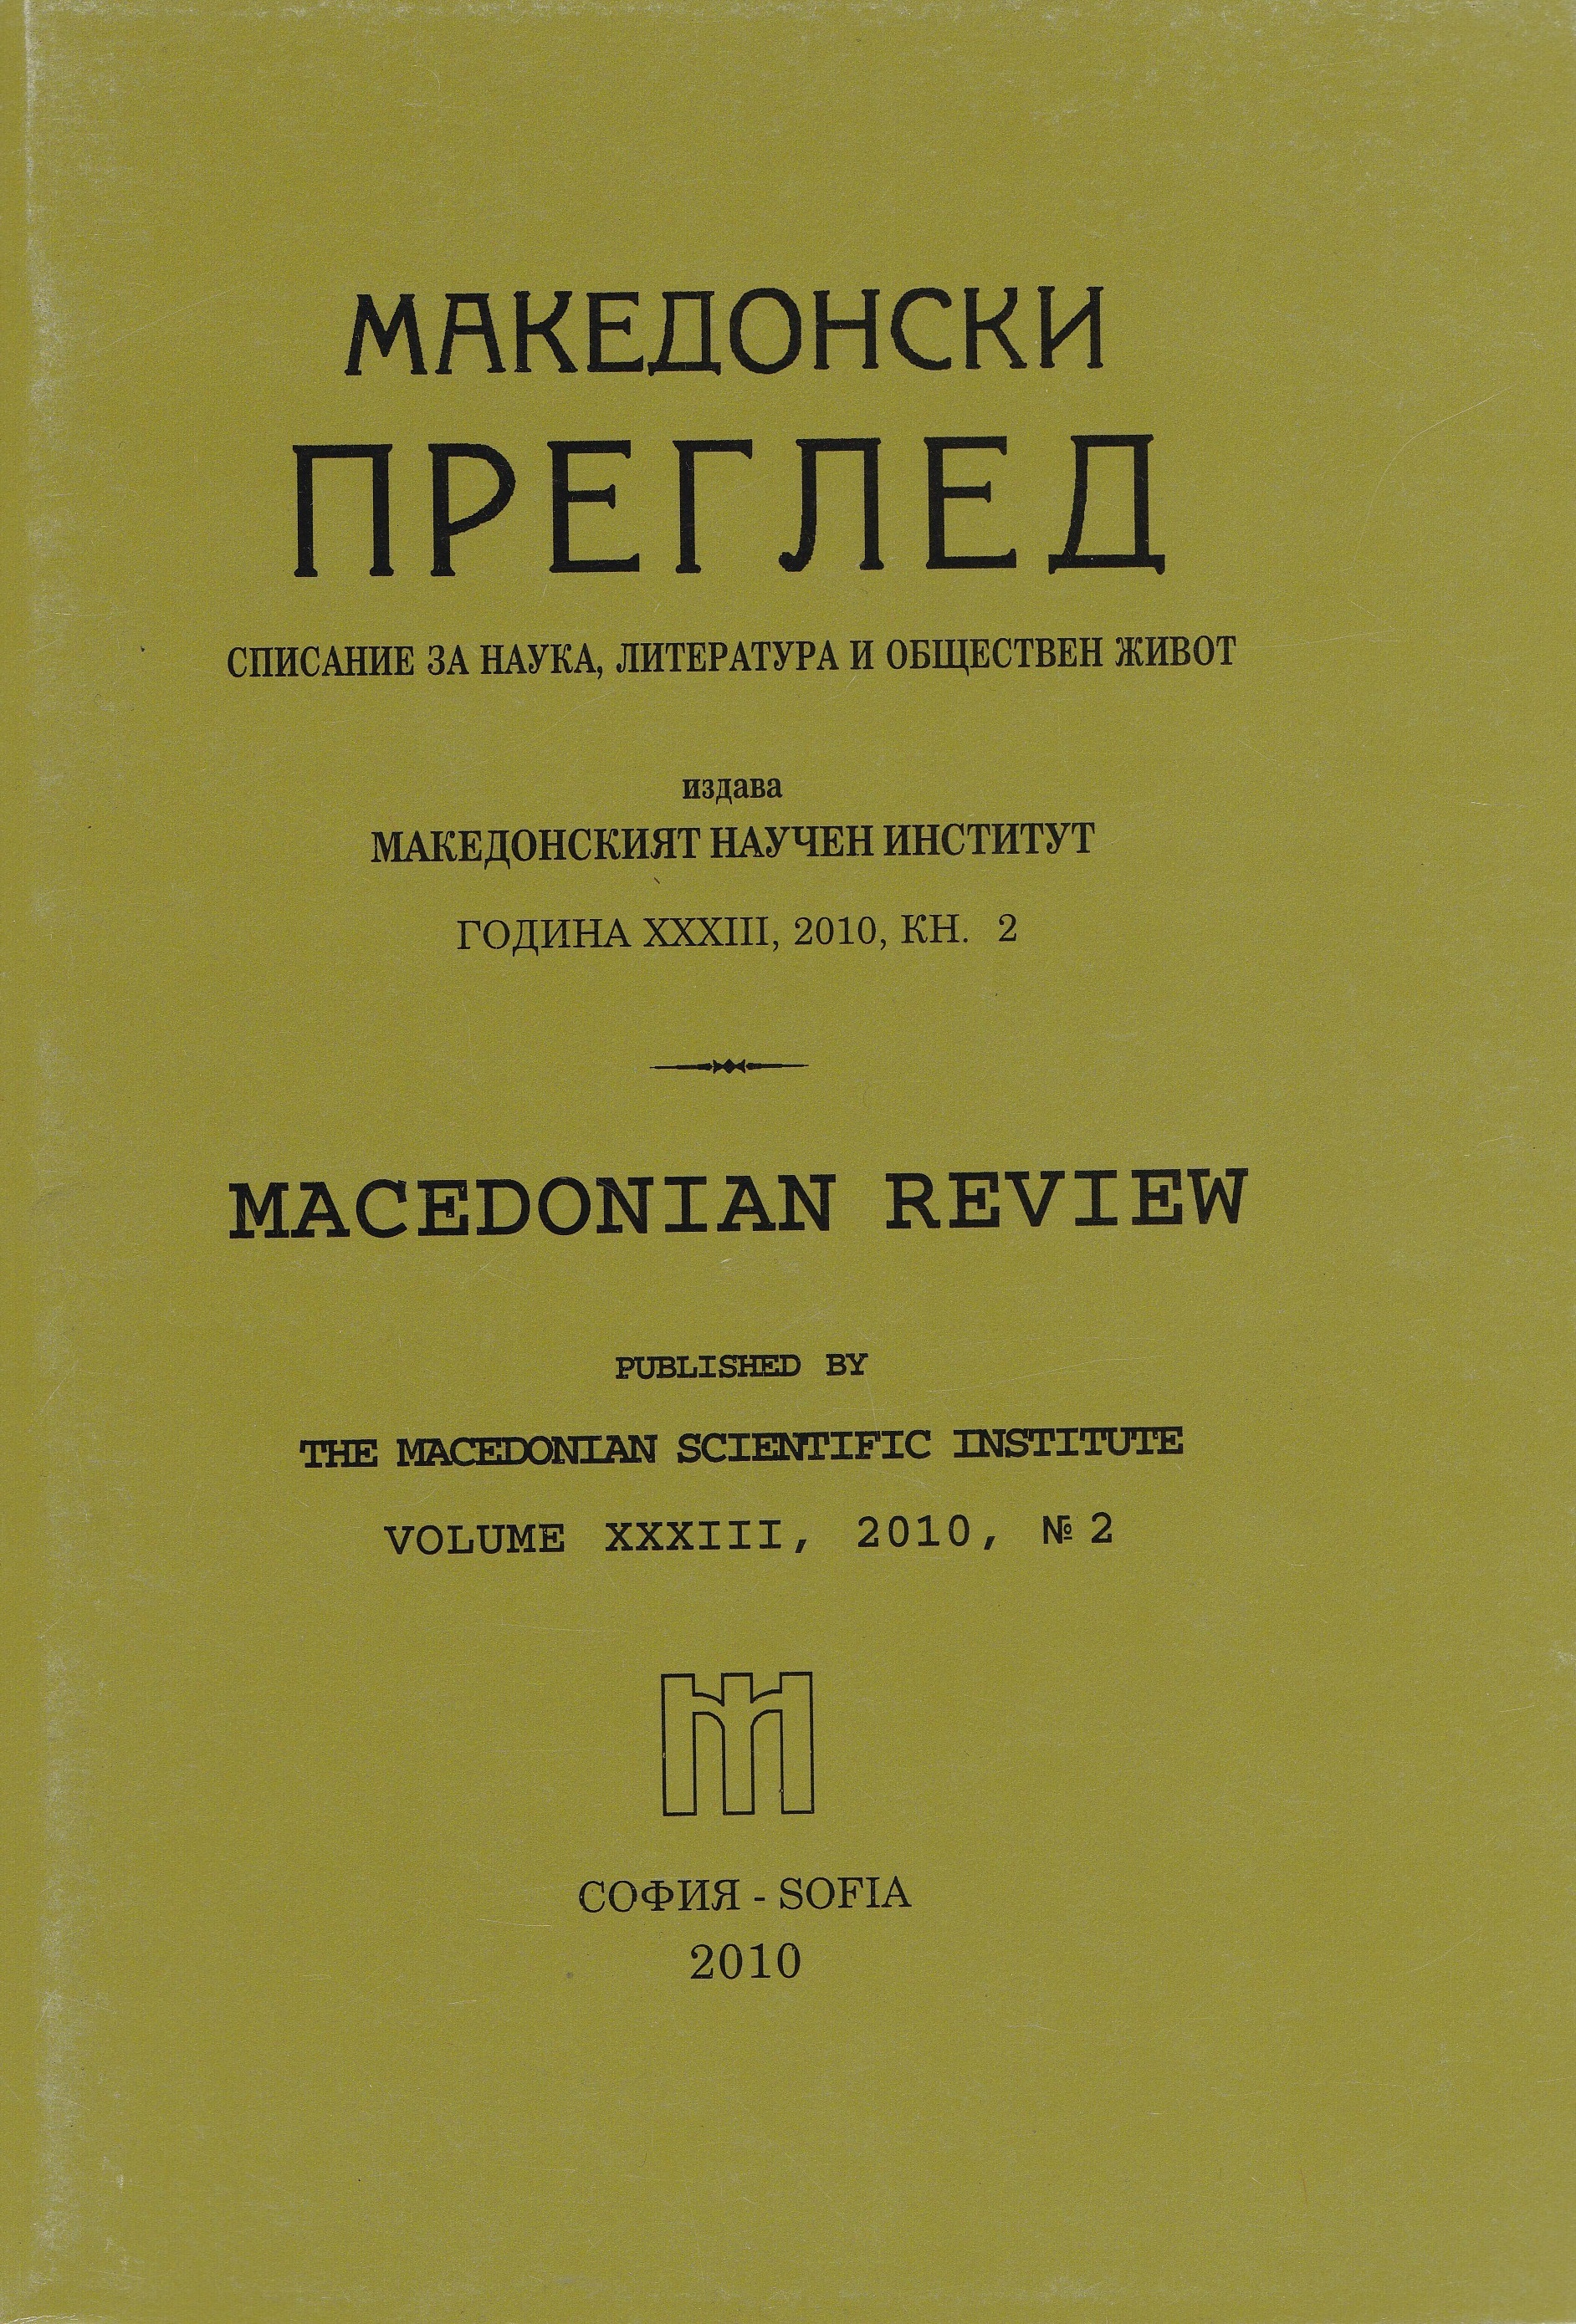 80 years since the establishment of the Macedonian cultural house Cover Image